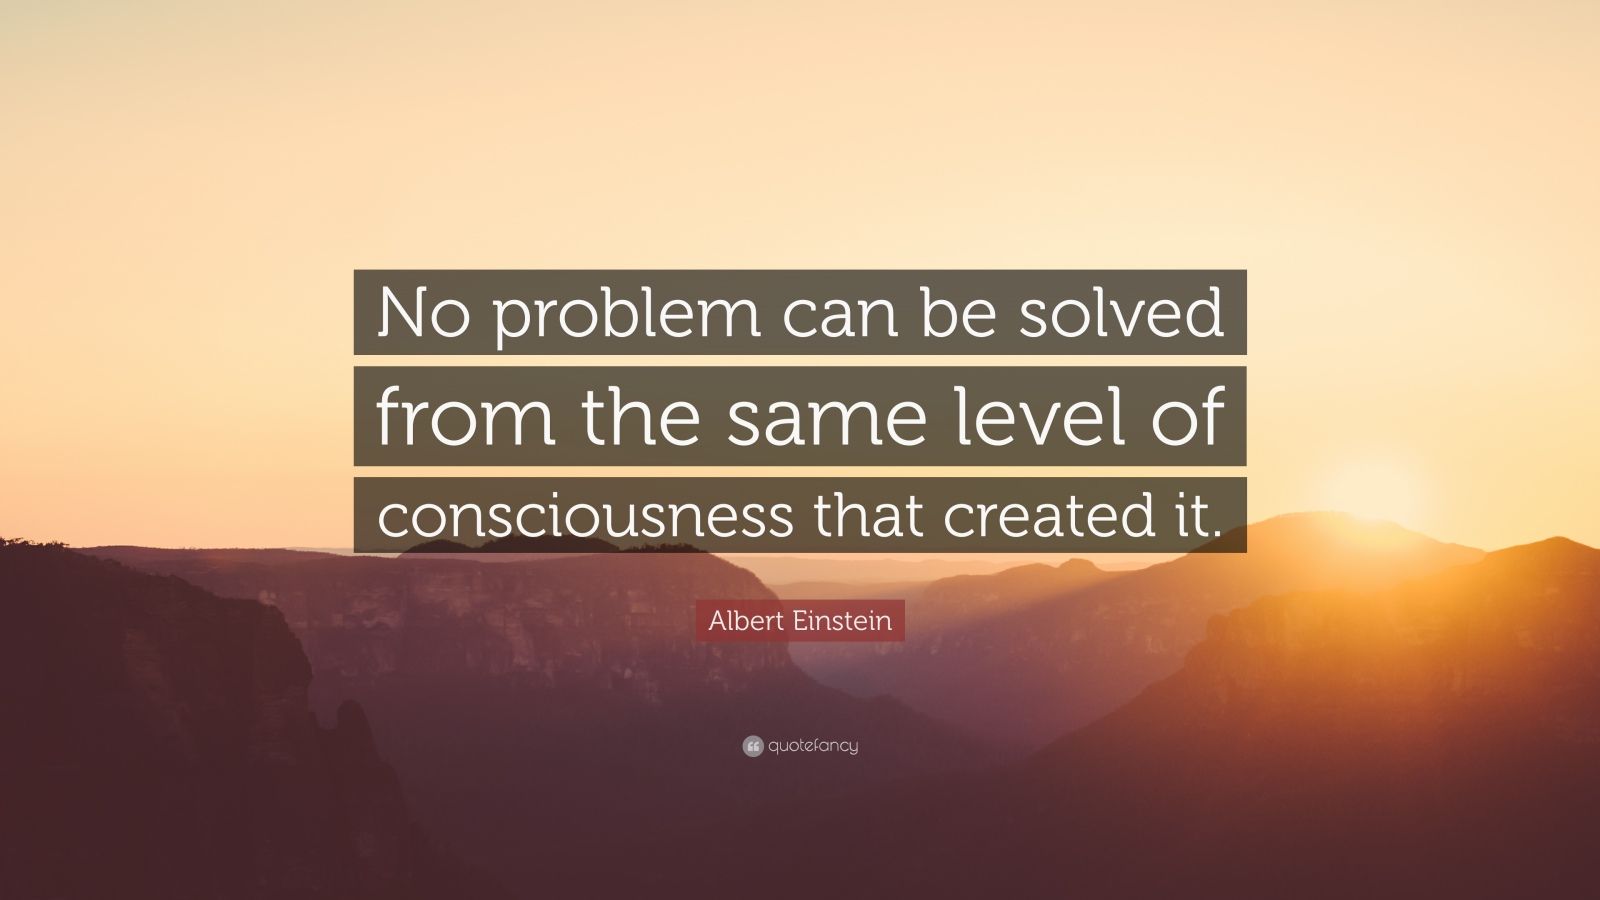 Albert Einstein Quote: “No problem can be solved from the same level of